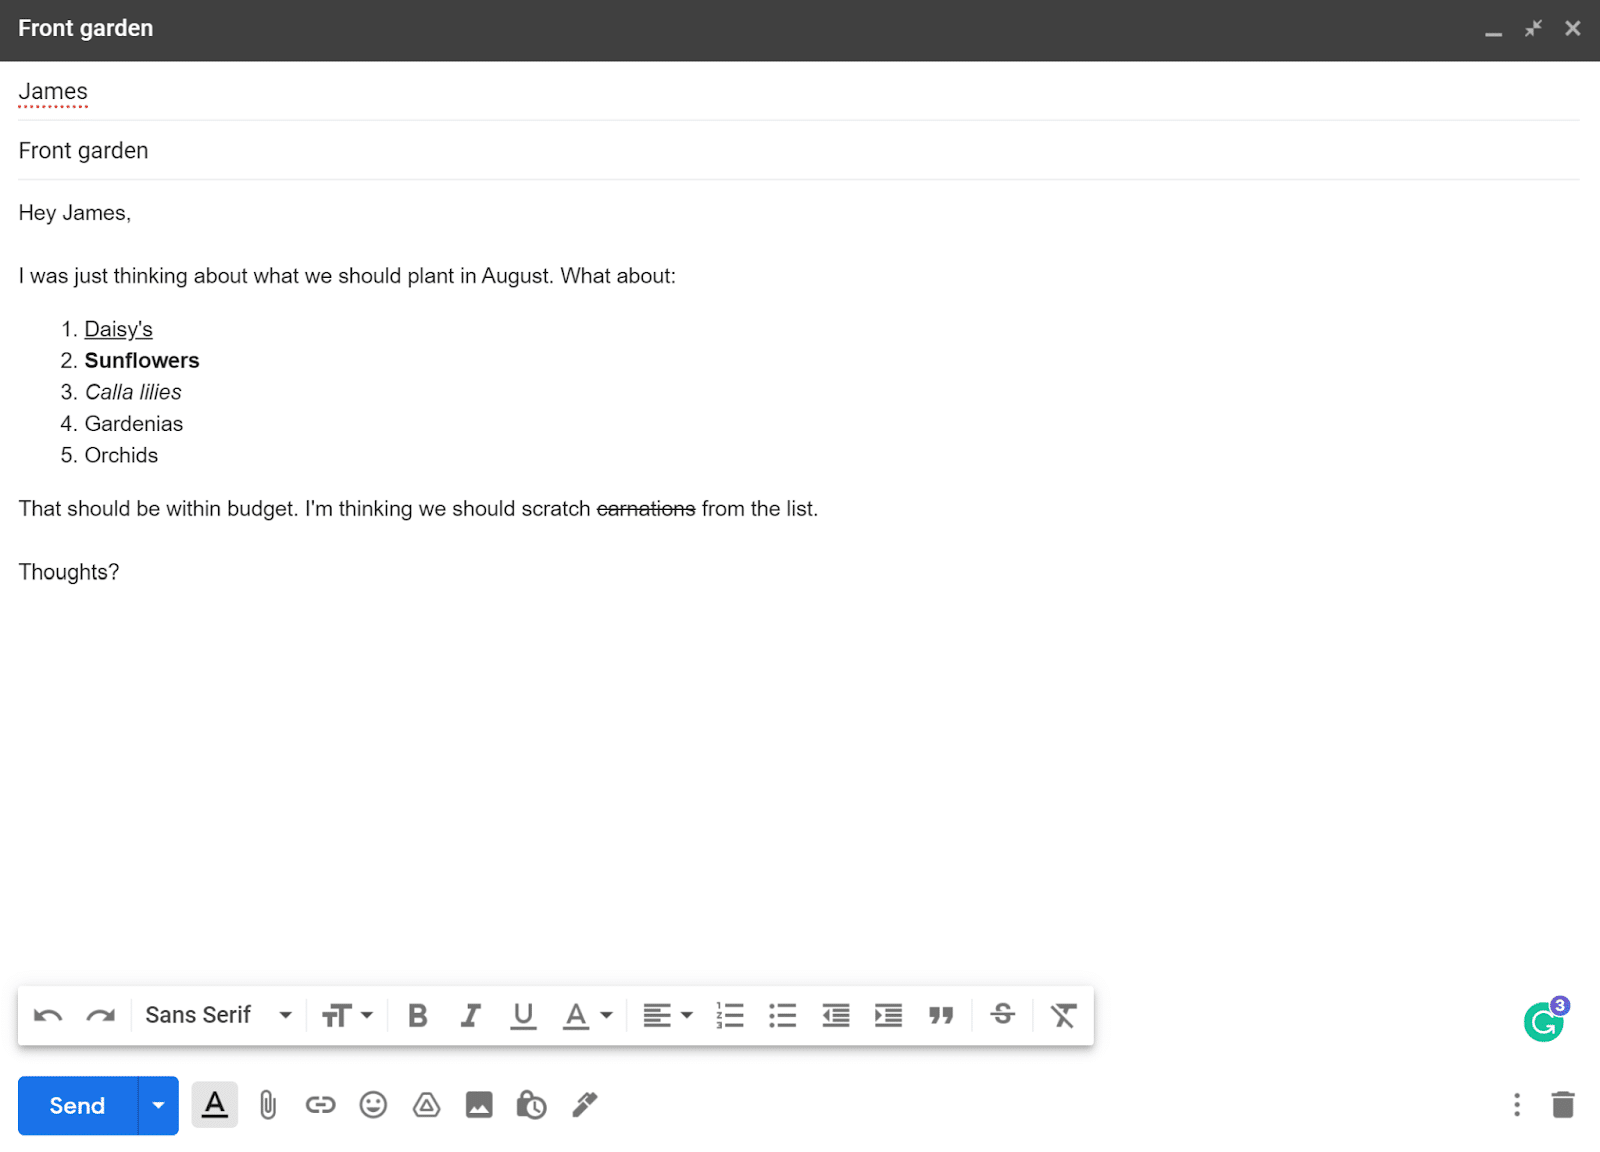 A sample email with the subject "Front garden" and text showing different formatting effects like bold, italics, etc.